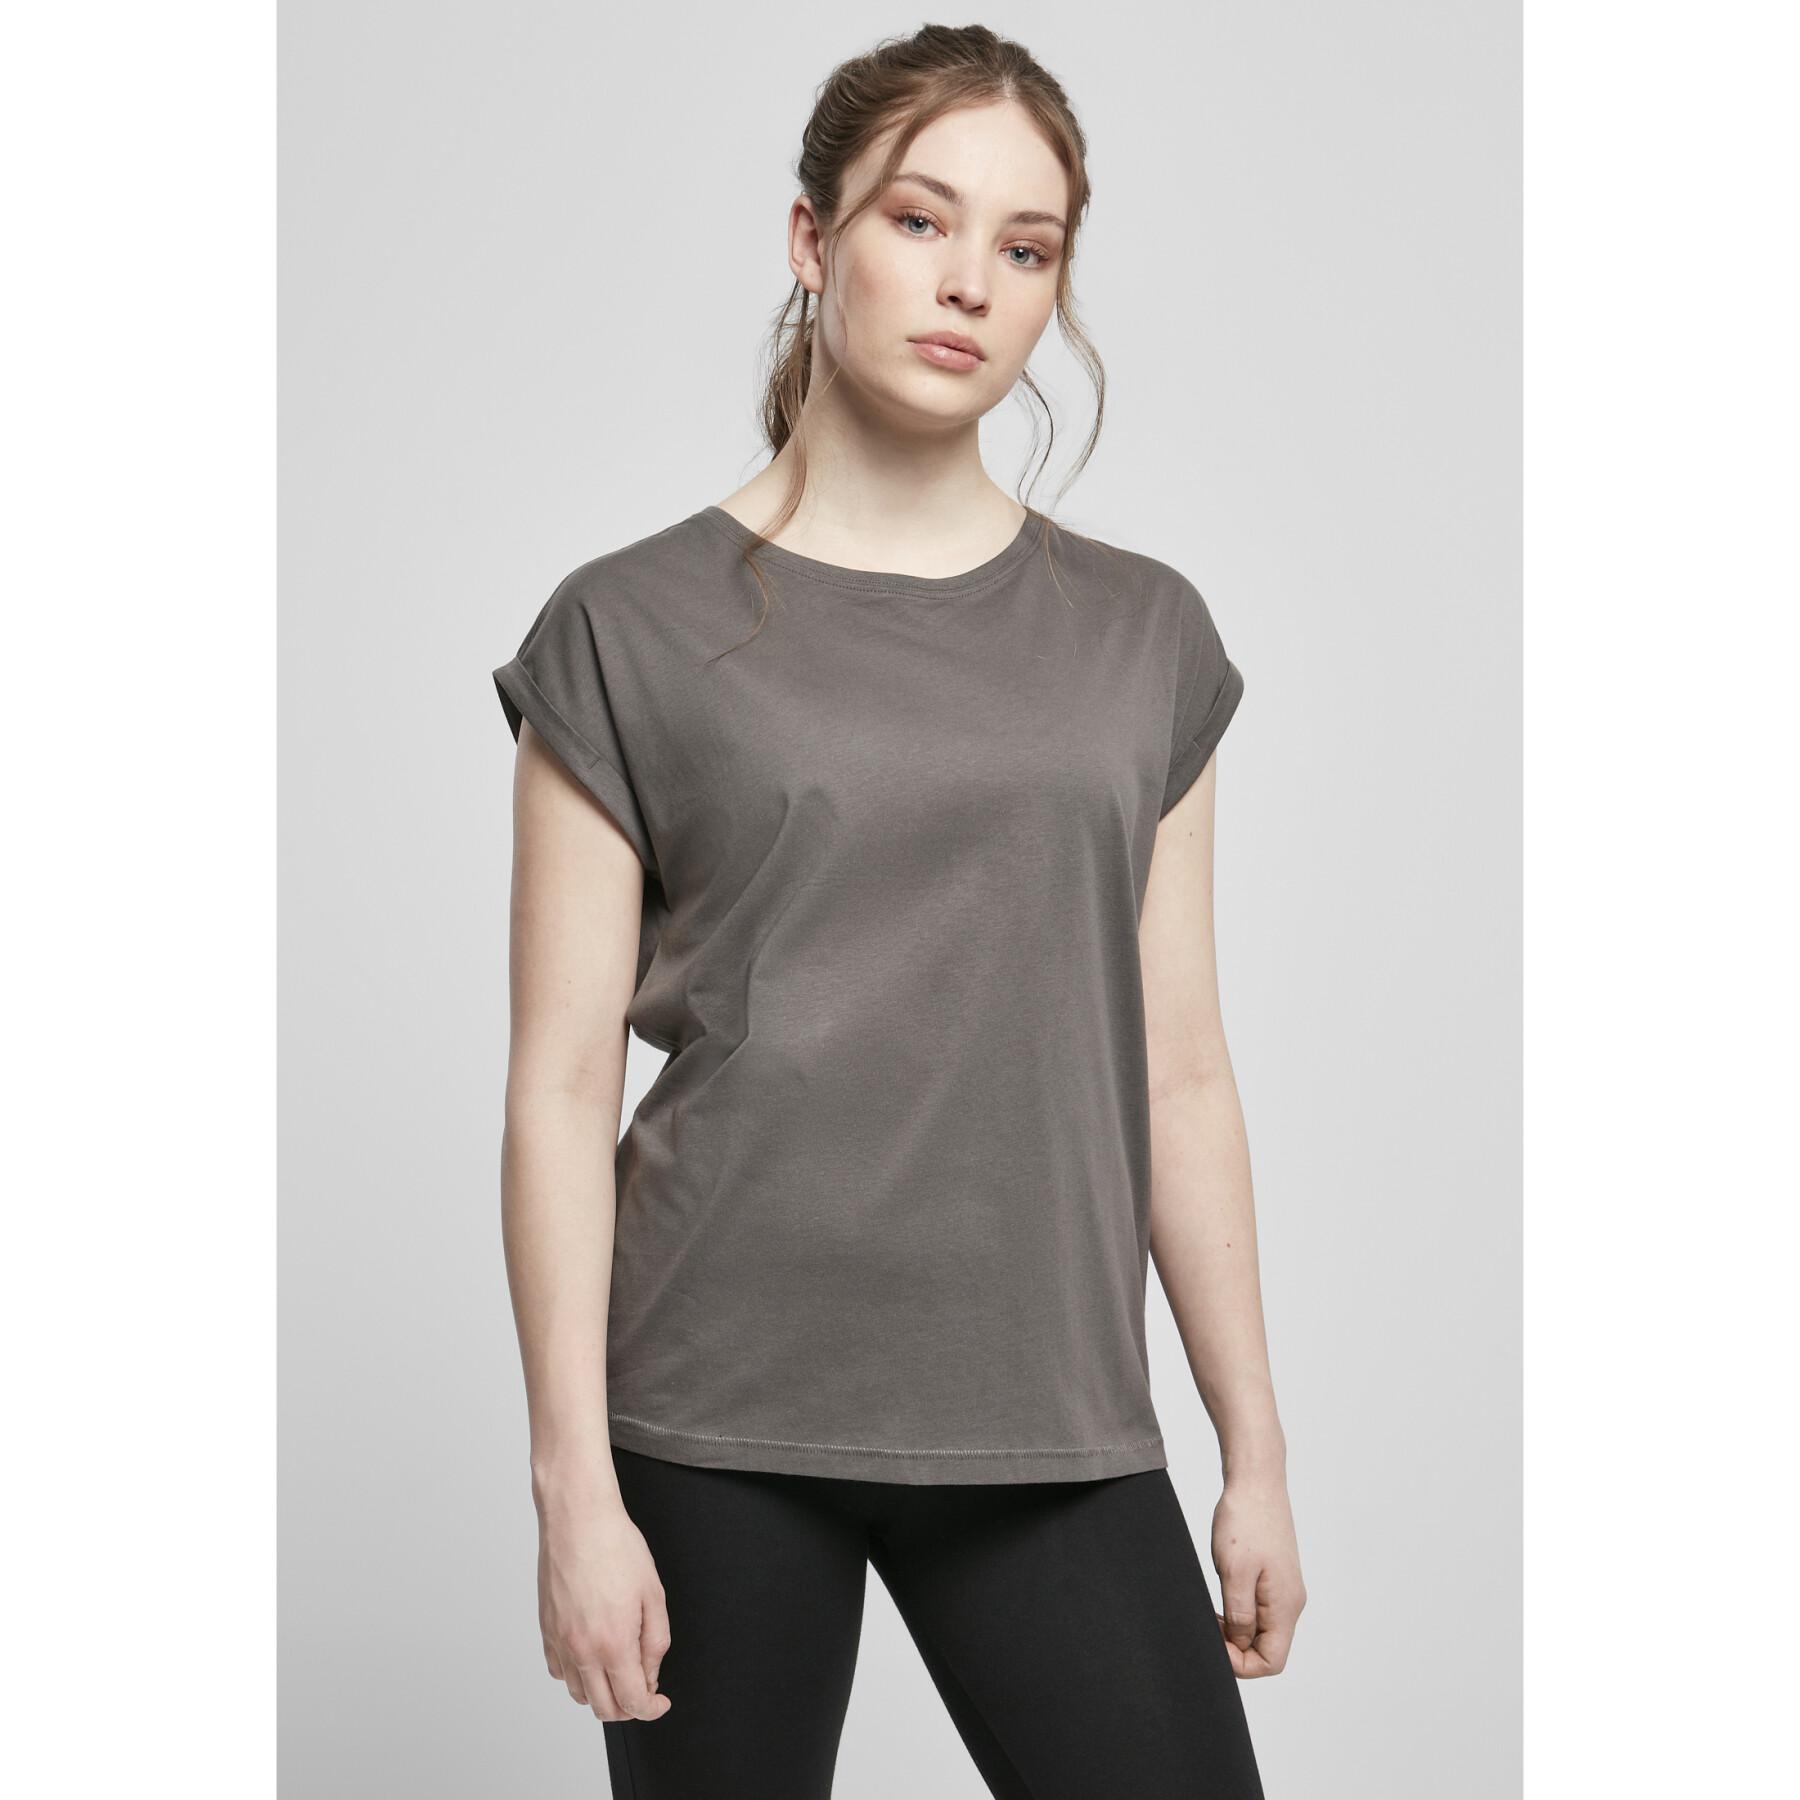 Camiseta mujer Urban Classics extended shoulder